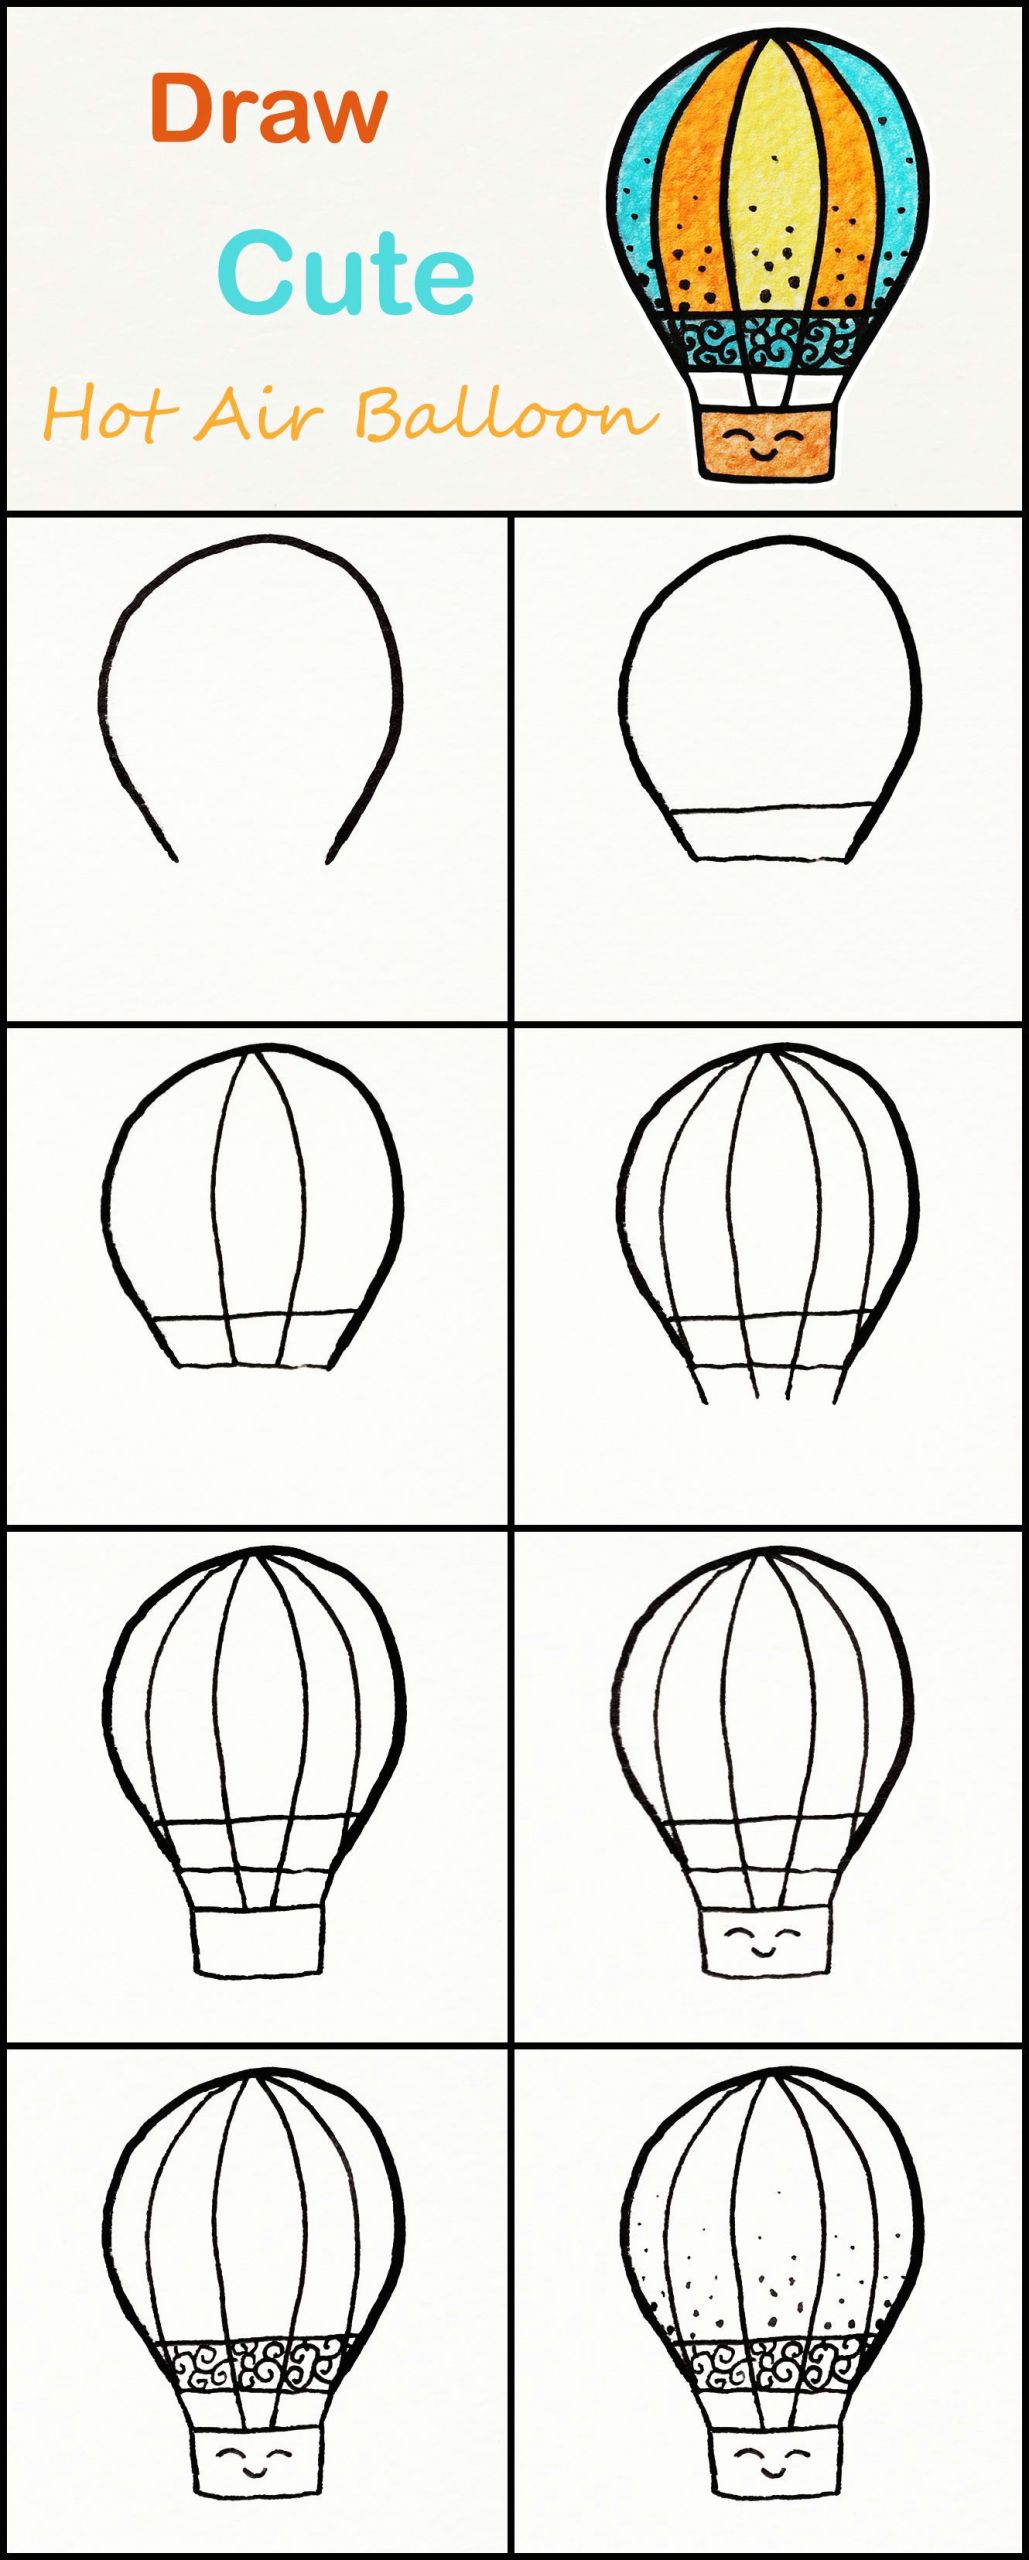 Easy Hot Air Balloon Drawing Learn How to Draw A Cute Hot Air Balloon Step by Step